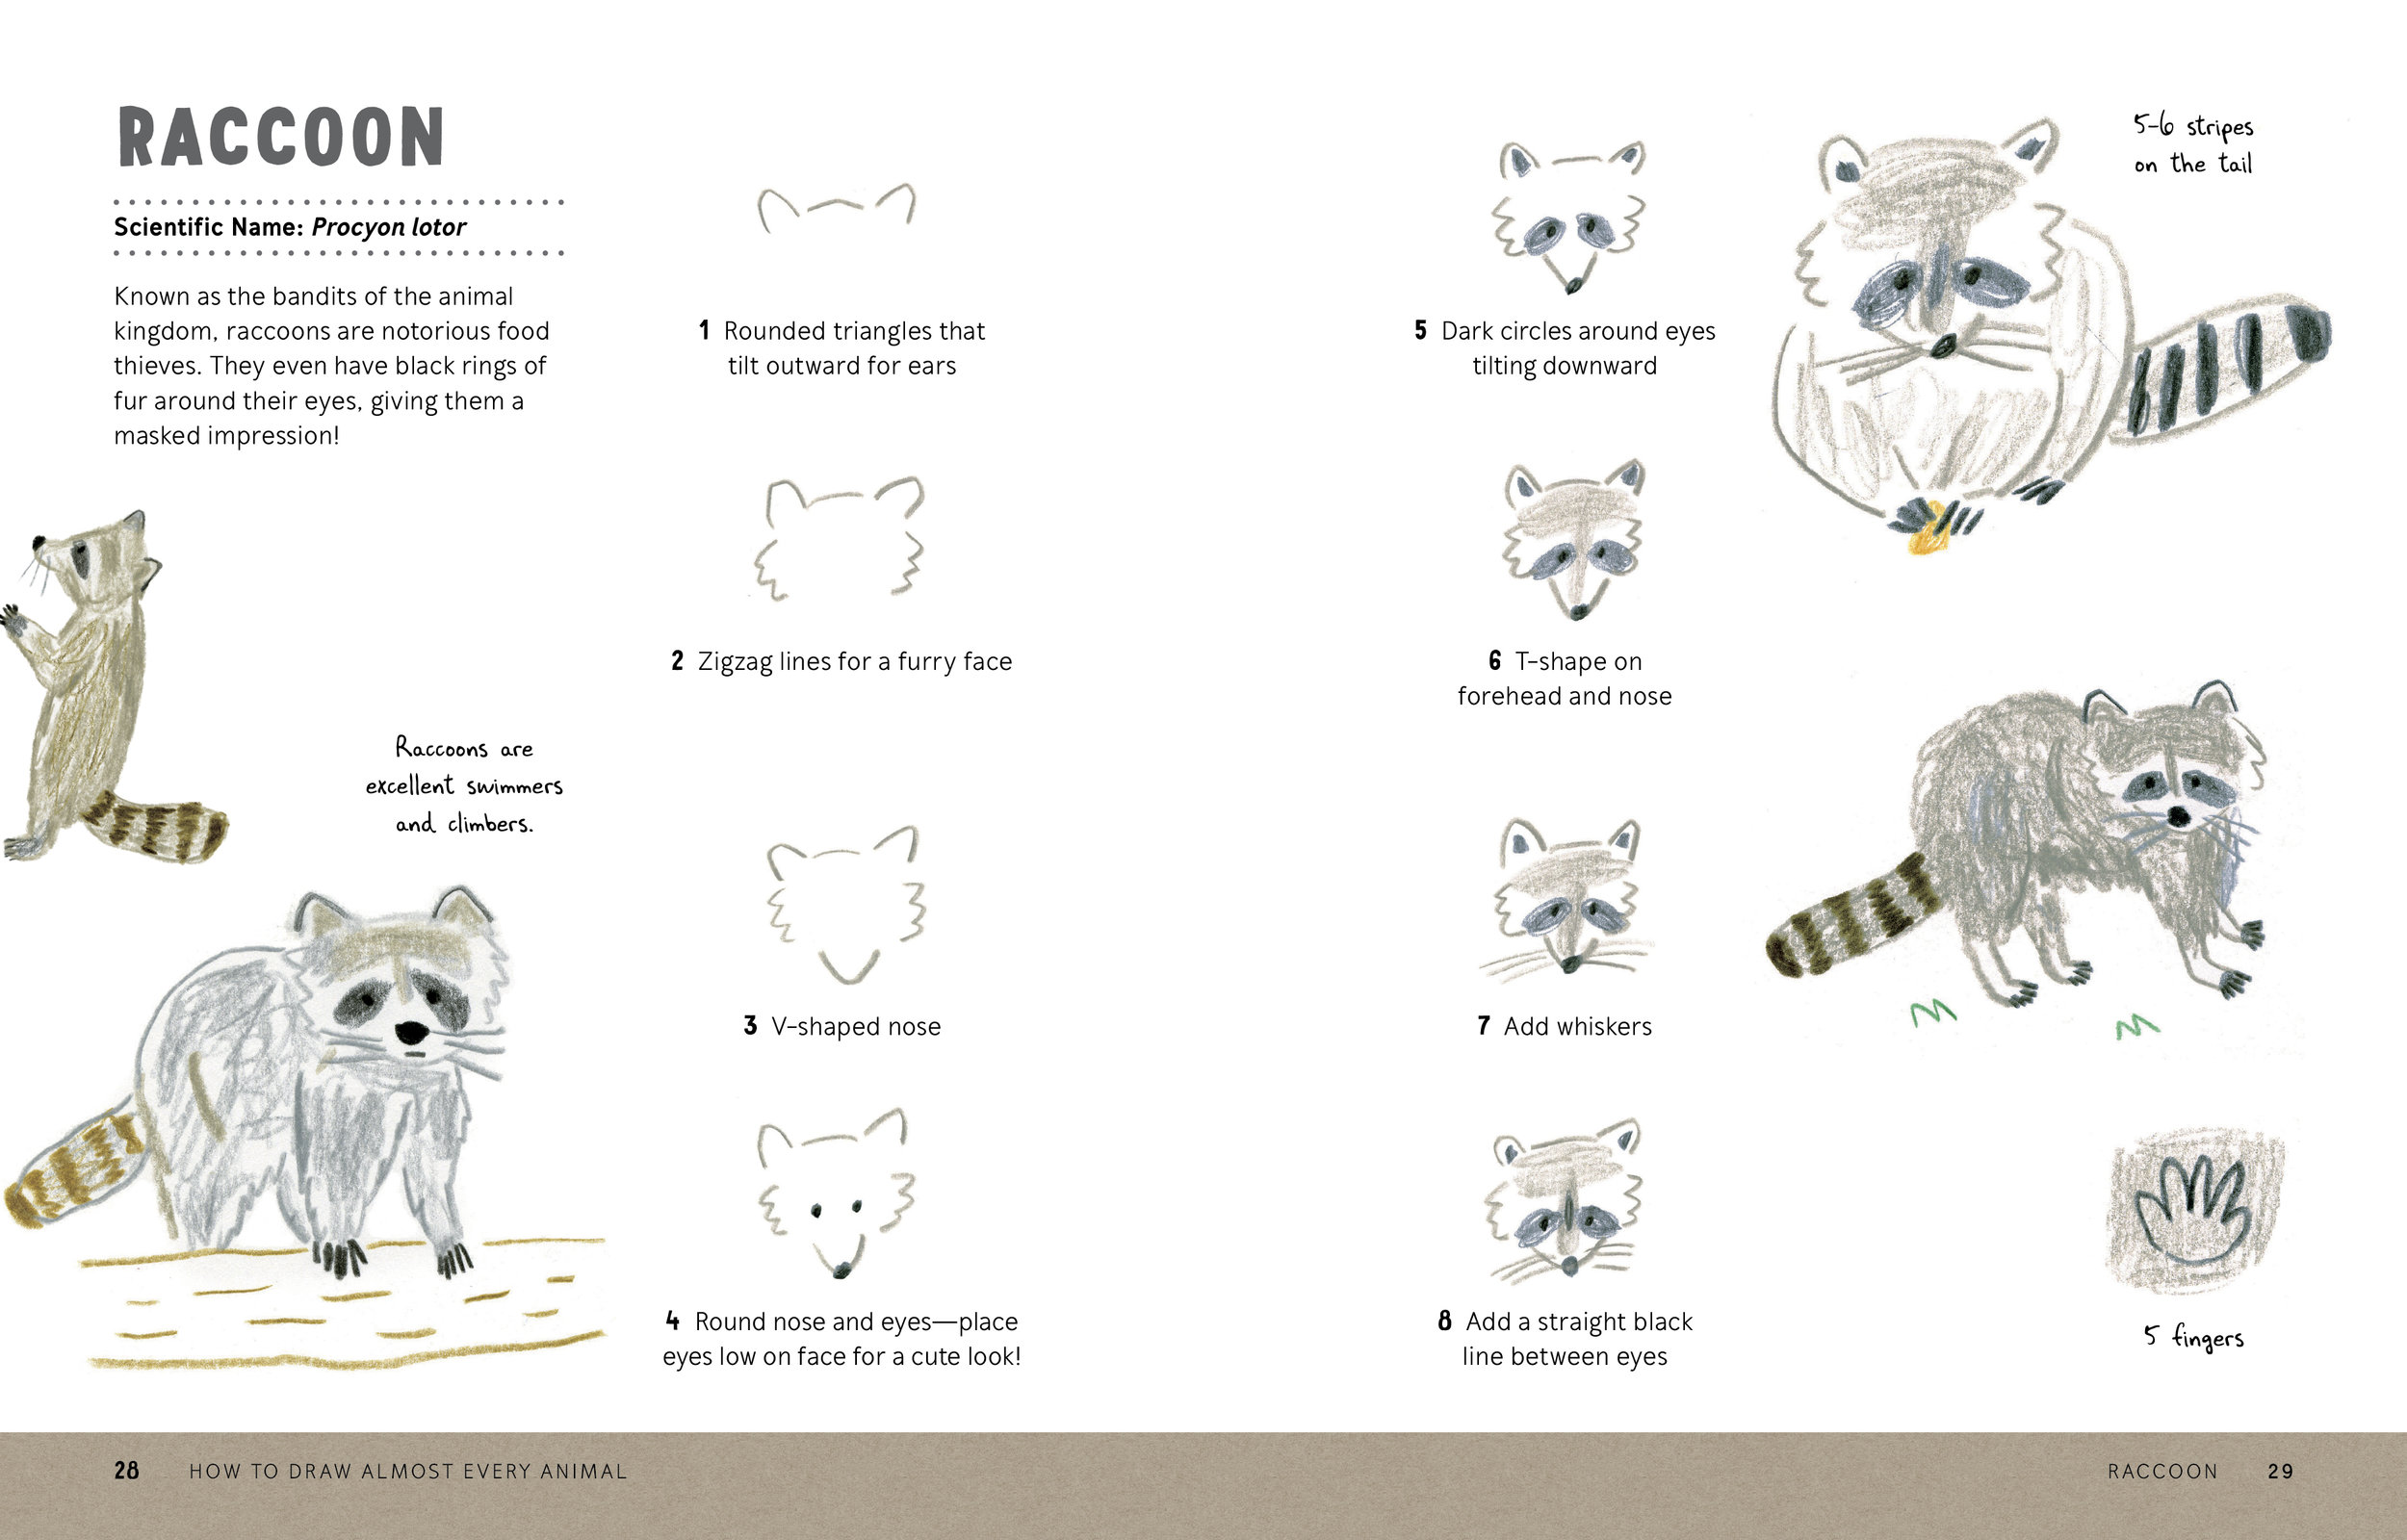 How to Draw Almost Every Animal 28.29.jpg